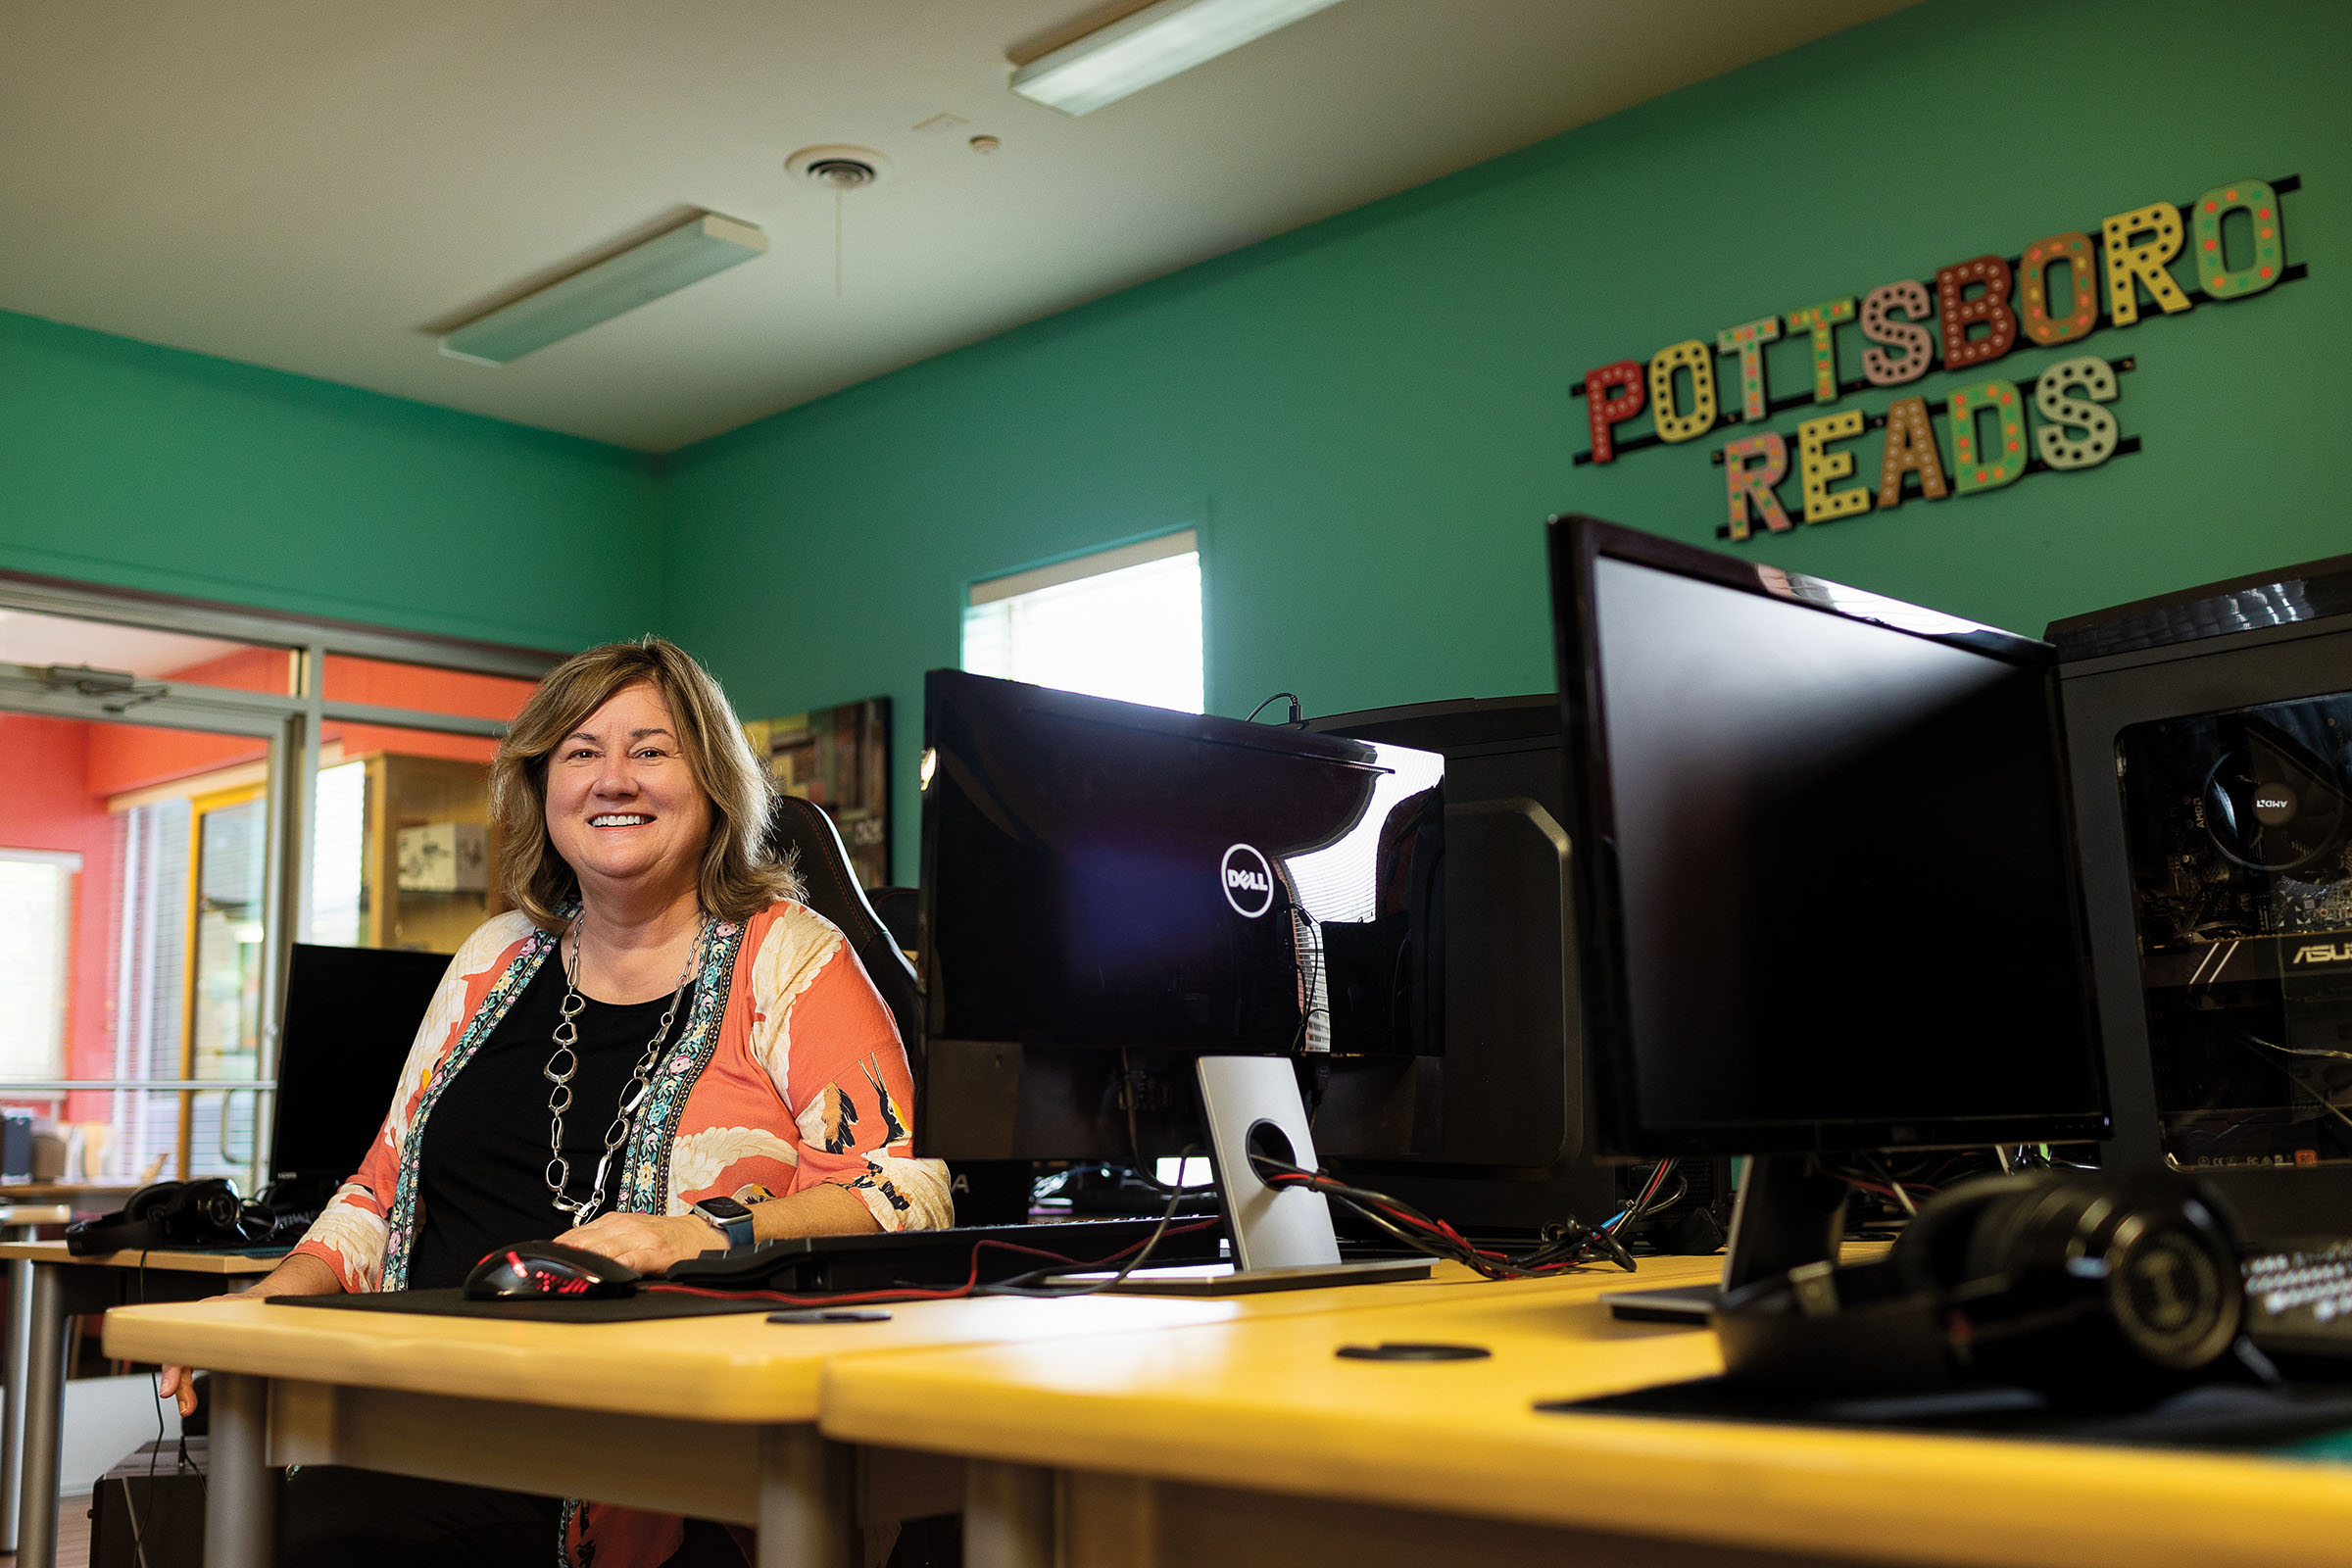 A woman sits in front of a computer in a room with numerous computers and lettering on the wall reading "Pottsboro Reads"